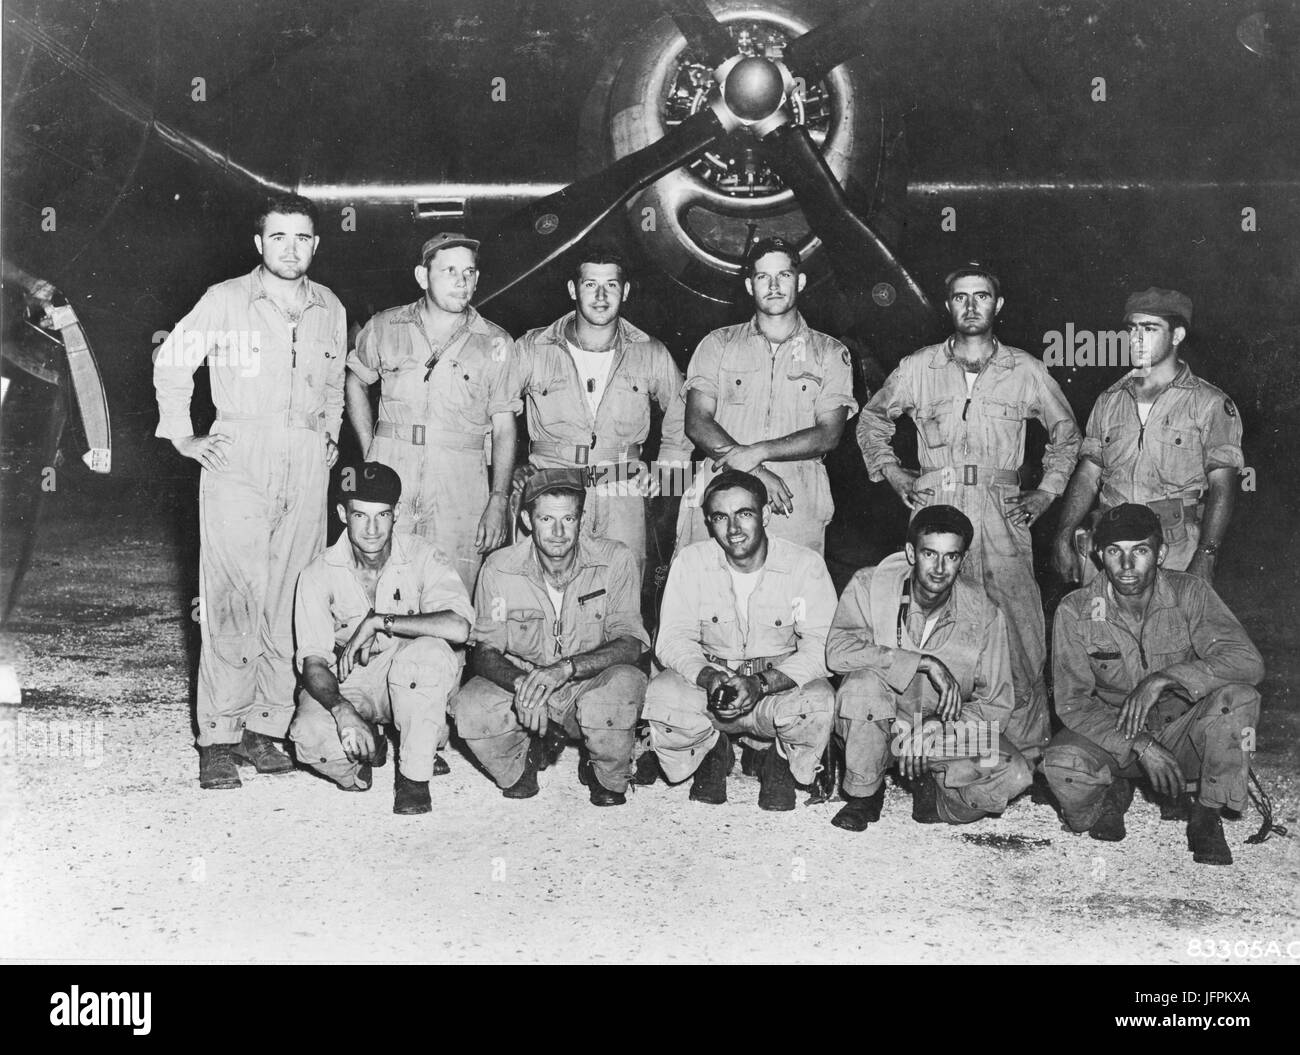 Major Charles W. Sweeney (standing left), Commanding Officer 393rd Bombardment Squadron and pilot of 'The Great Artiste,' and his crew. Sweeney and his crew accompanied Tibbets and 'The Enola Gay' on the Hiroshima atomic bombing mission. August 6, 1945 Stock Photo